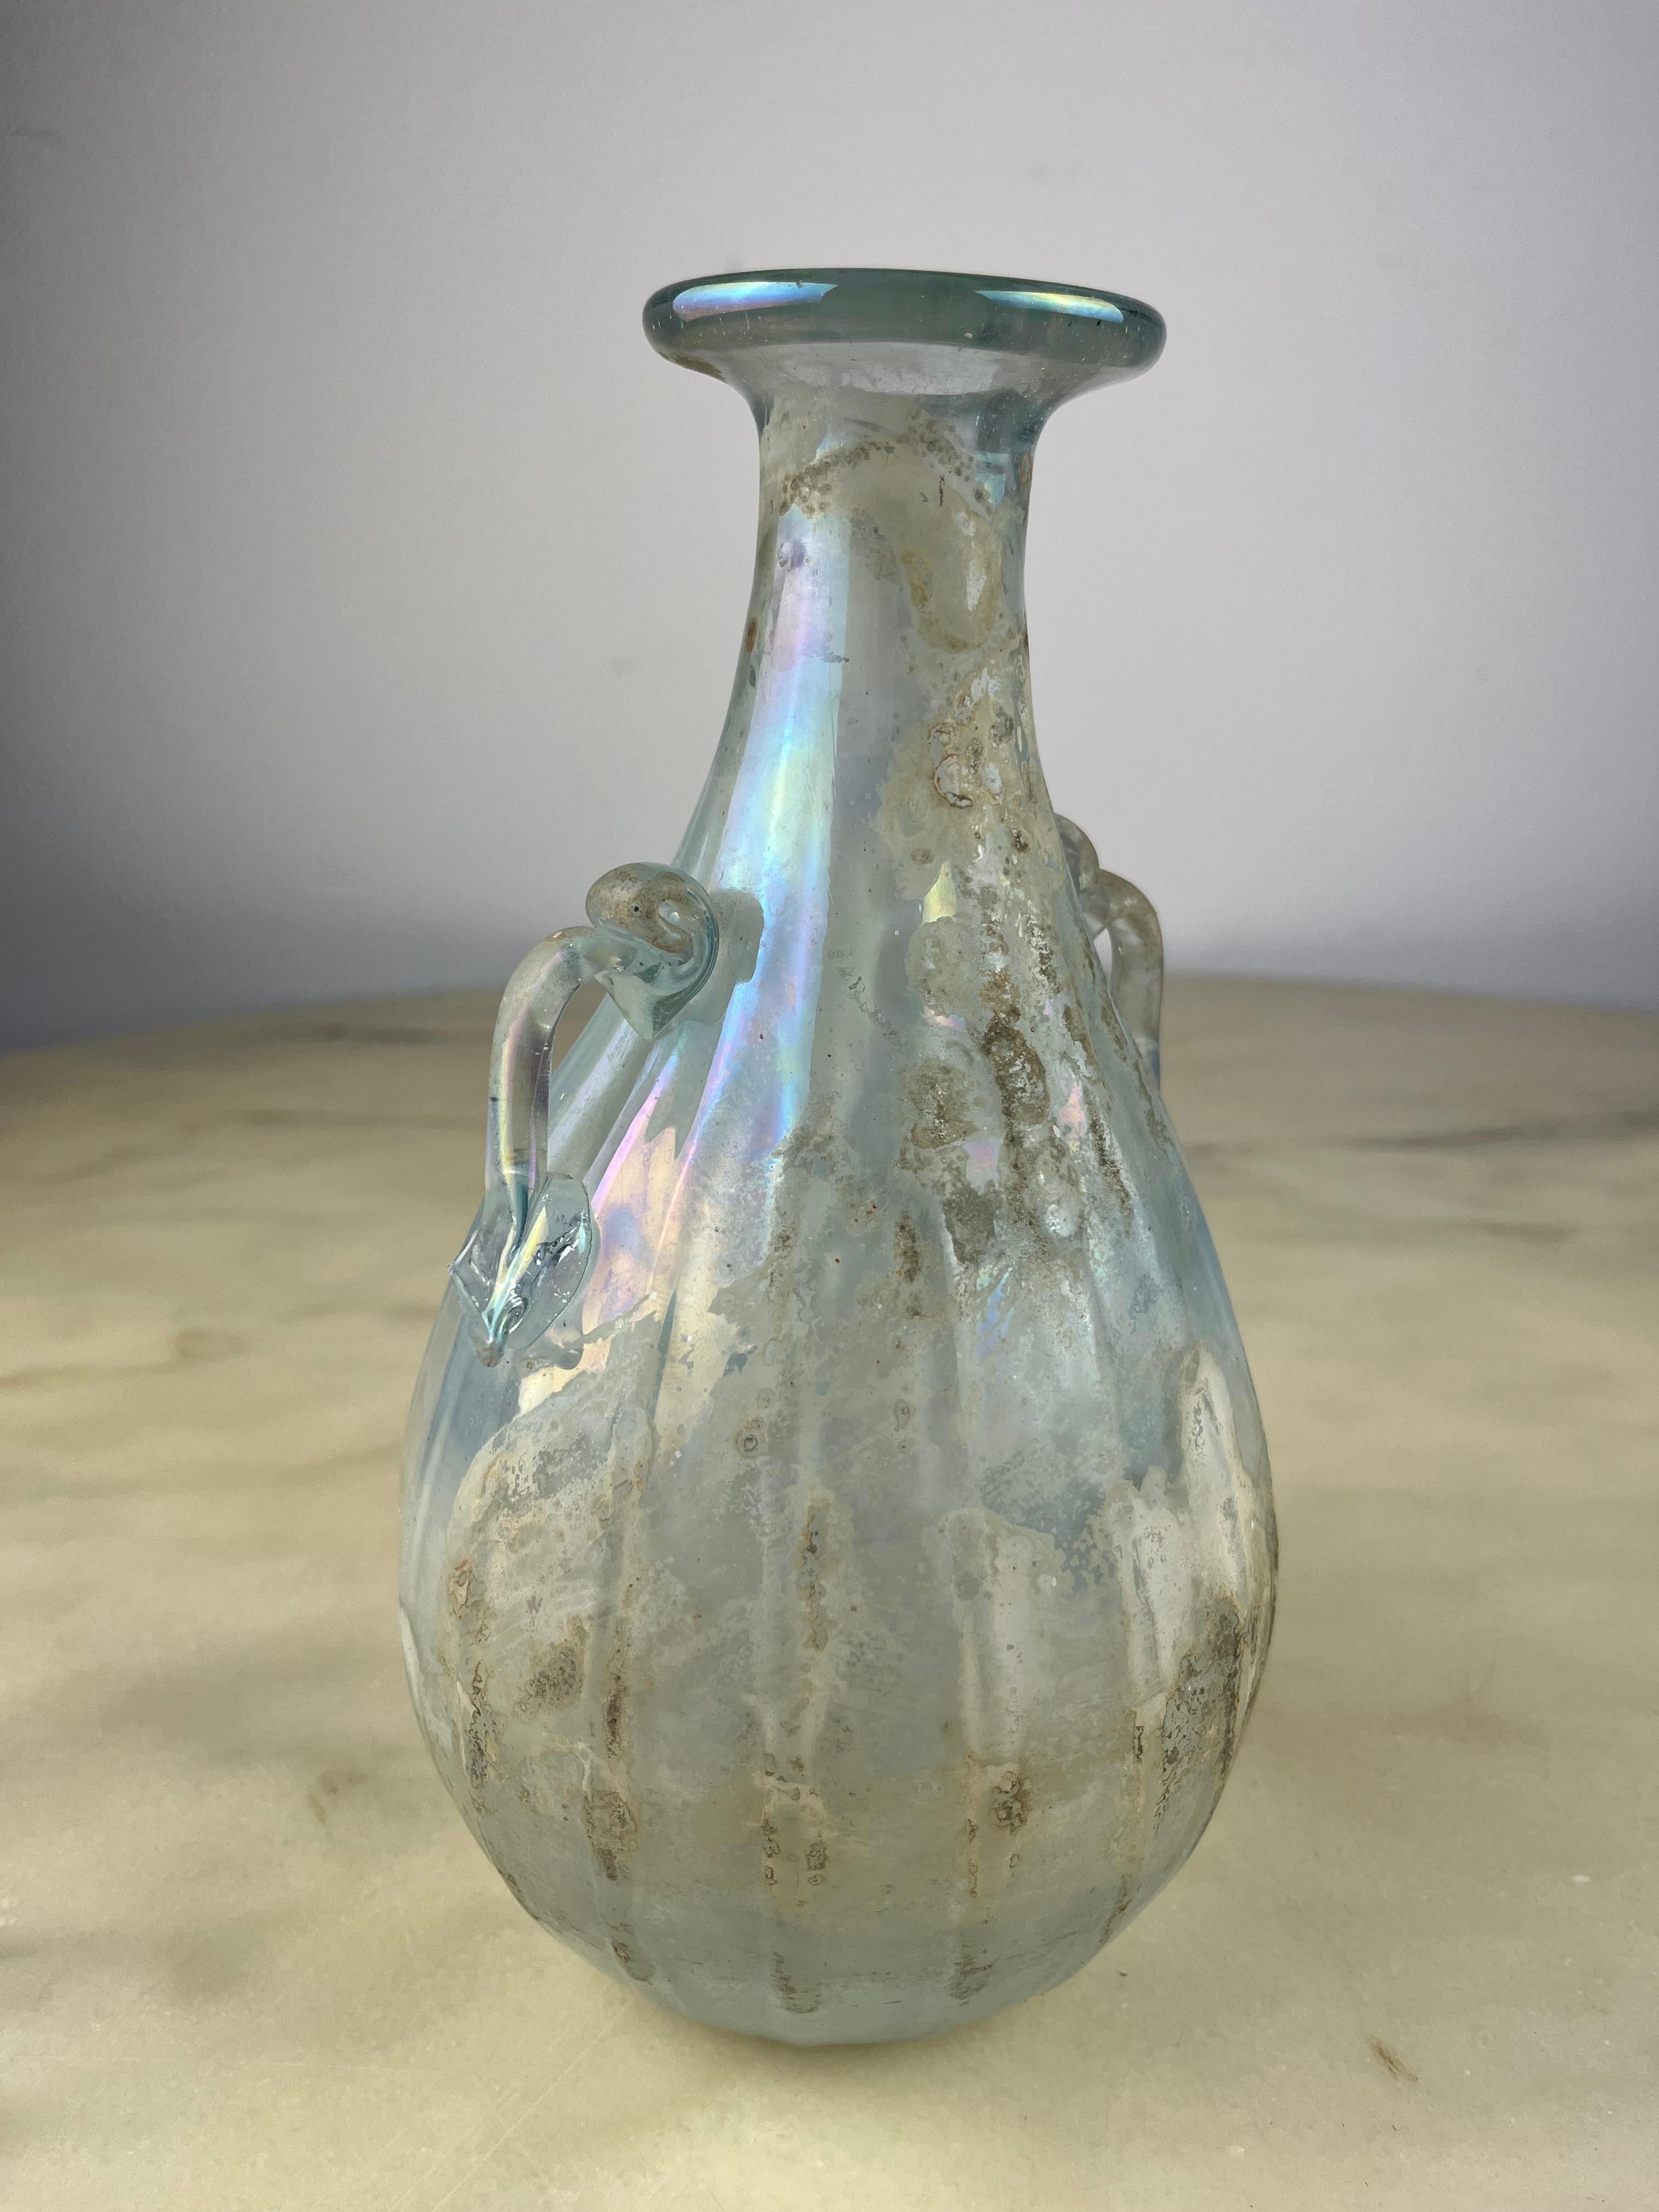 Opalescent Murano Glass Amphora Attributed to Archimede Seguso, Italy, 1940s
Found in a noble apartment in Venice. Passed down for generations.
It shows signs of aging and a break at the end of one handle, as shown in the photographs attached to the